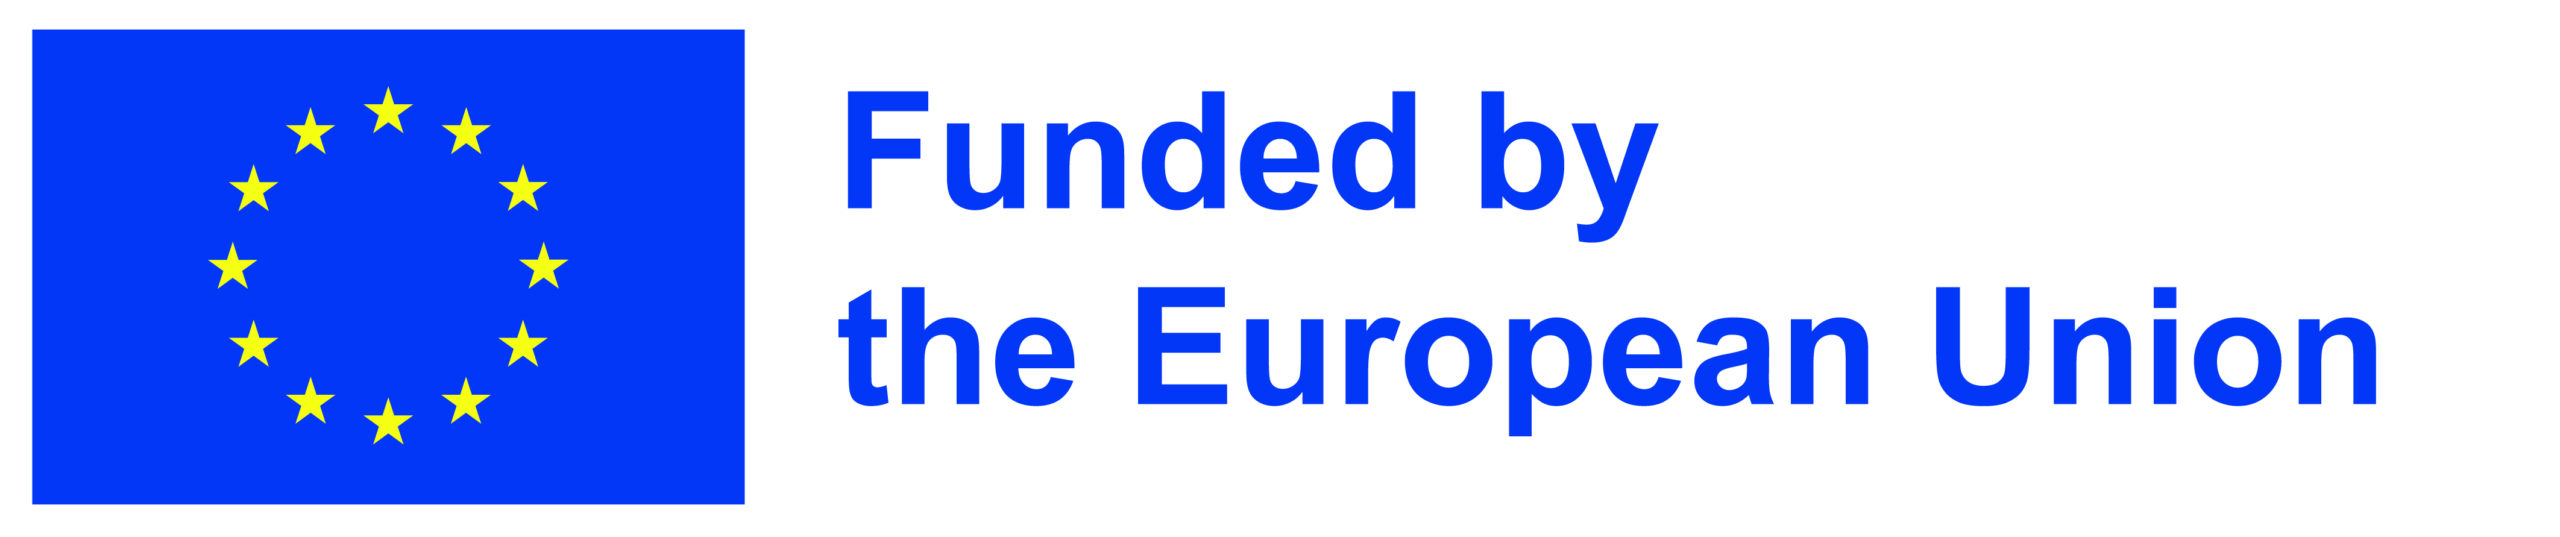 EN-Funded-by-the-EU-POS-scaled-1.jpg